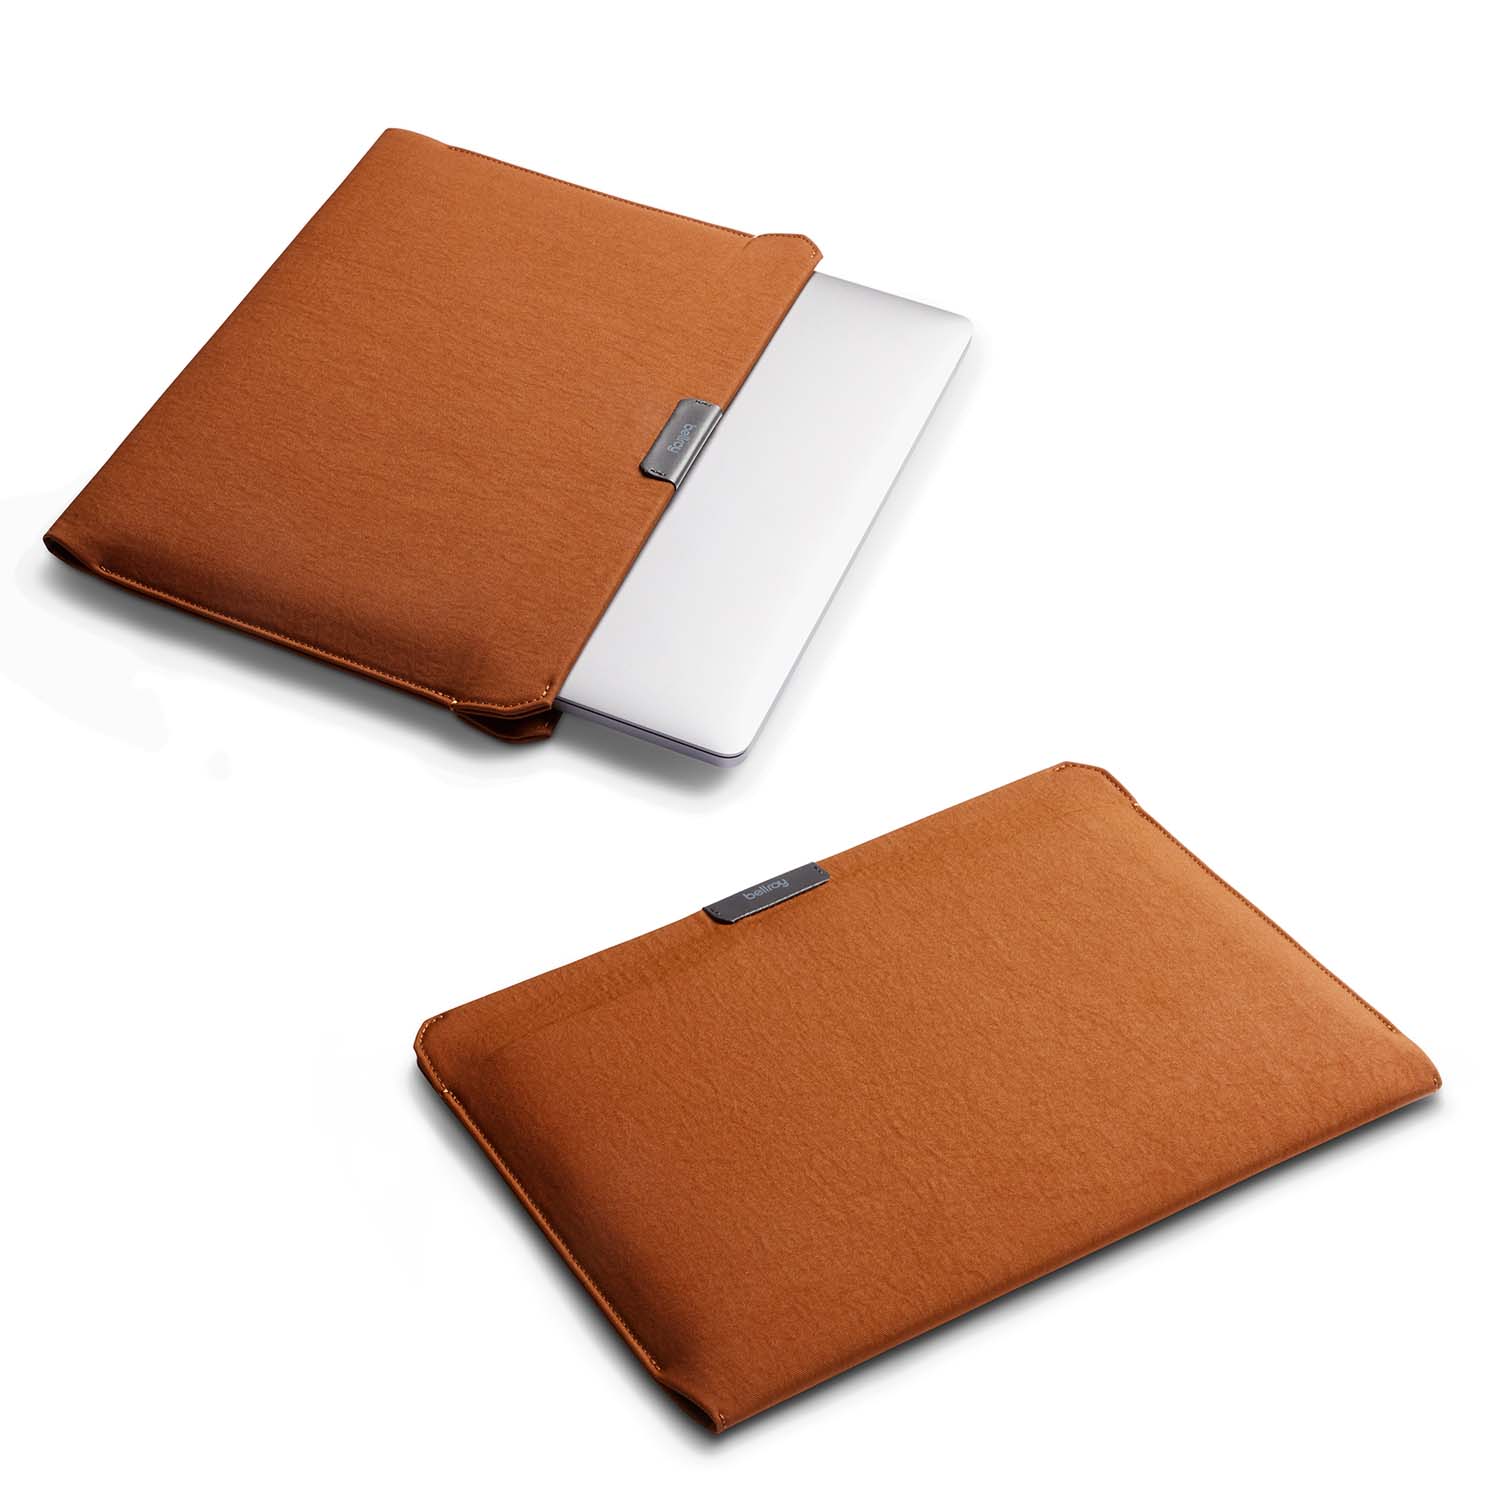 Bellroy Laptop Sleeve 14 and 16 inch - Storming Gravity